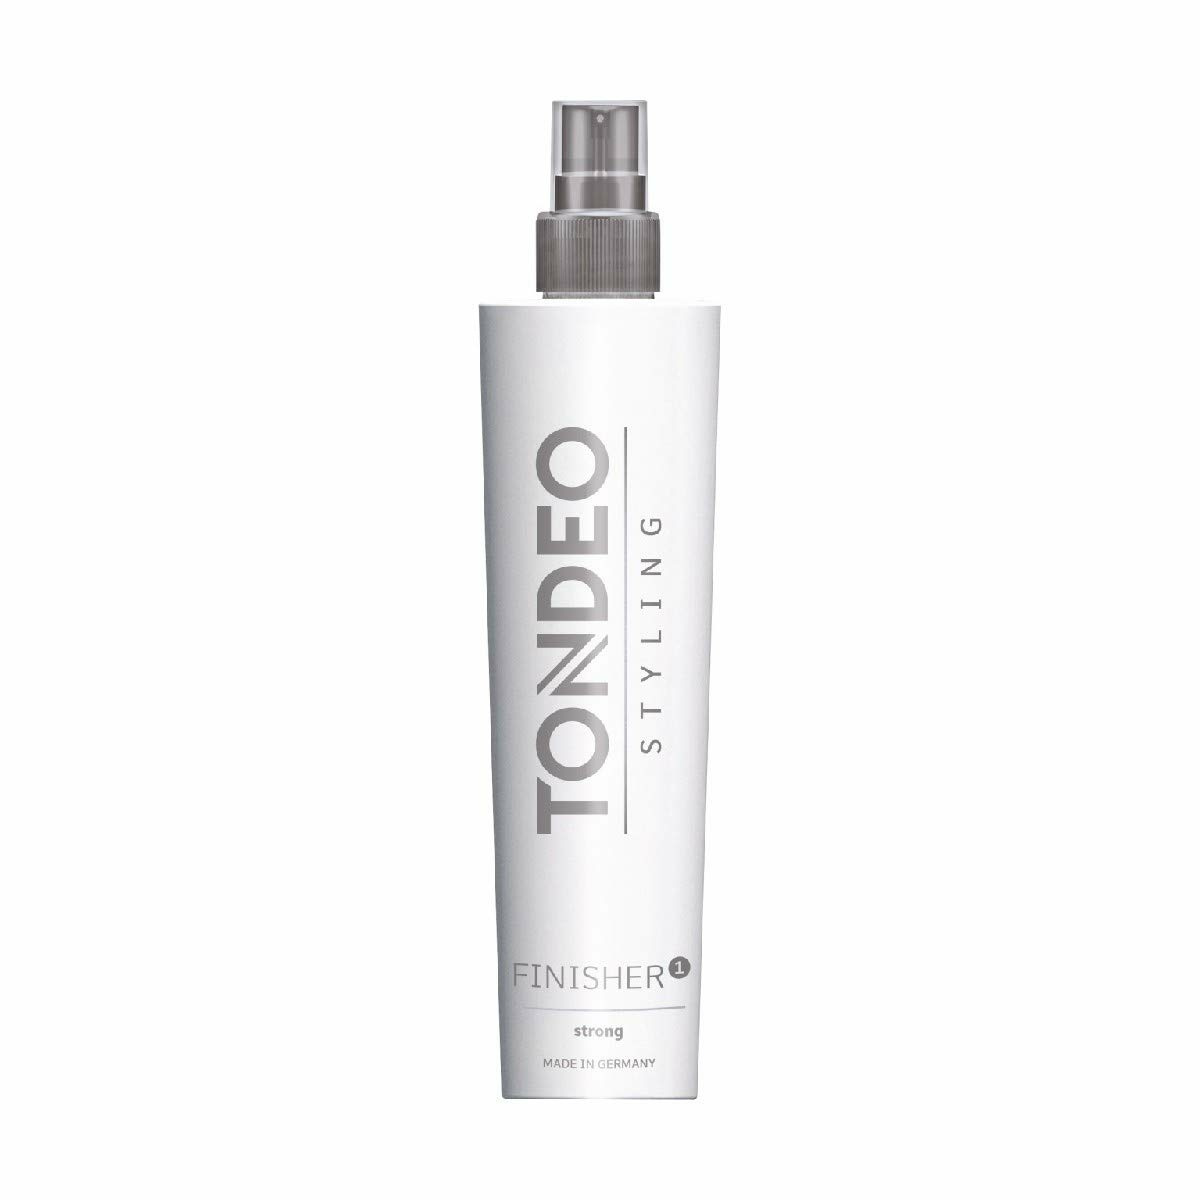 Tondeo Finisher 1 strong 200ml